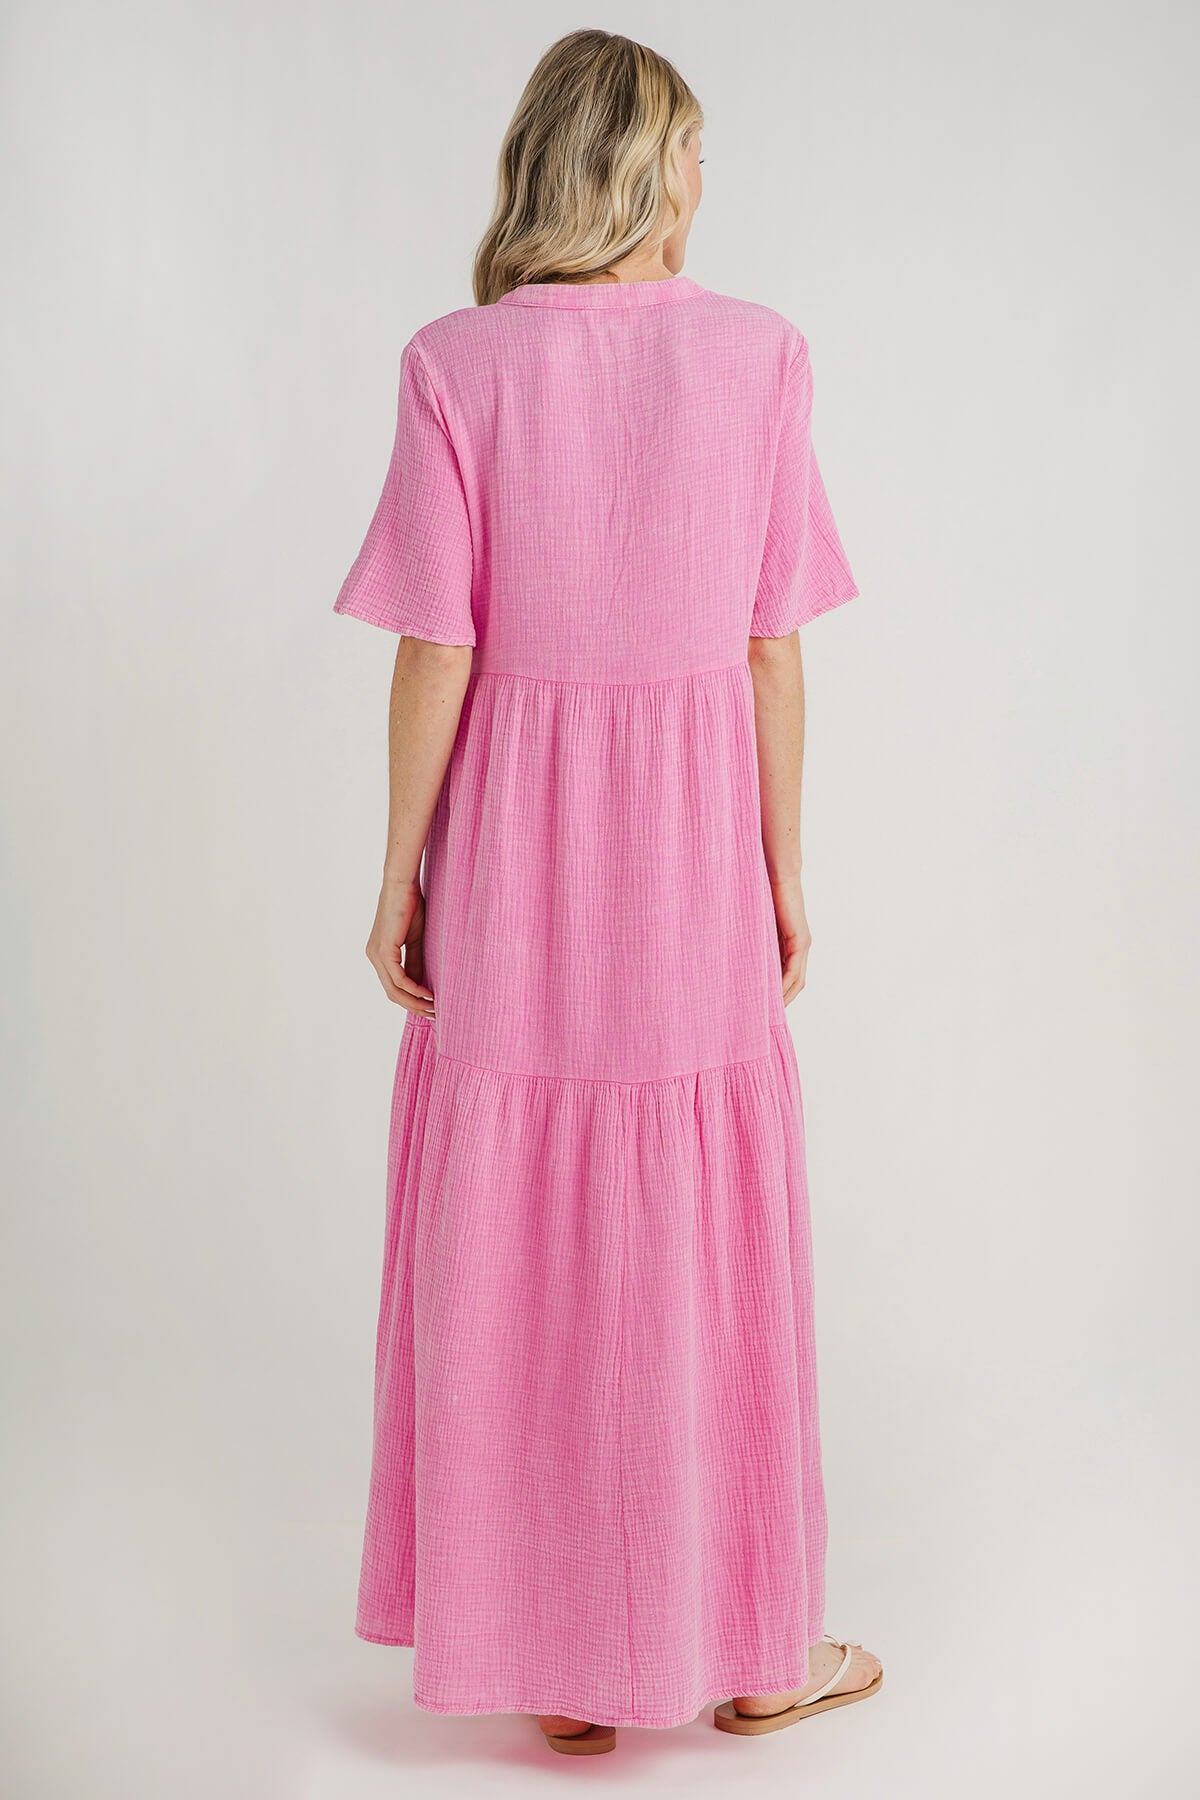 Eesome Mineral Washed Tiered Maxi Dress